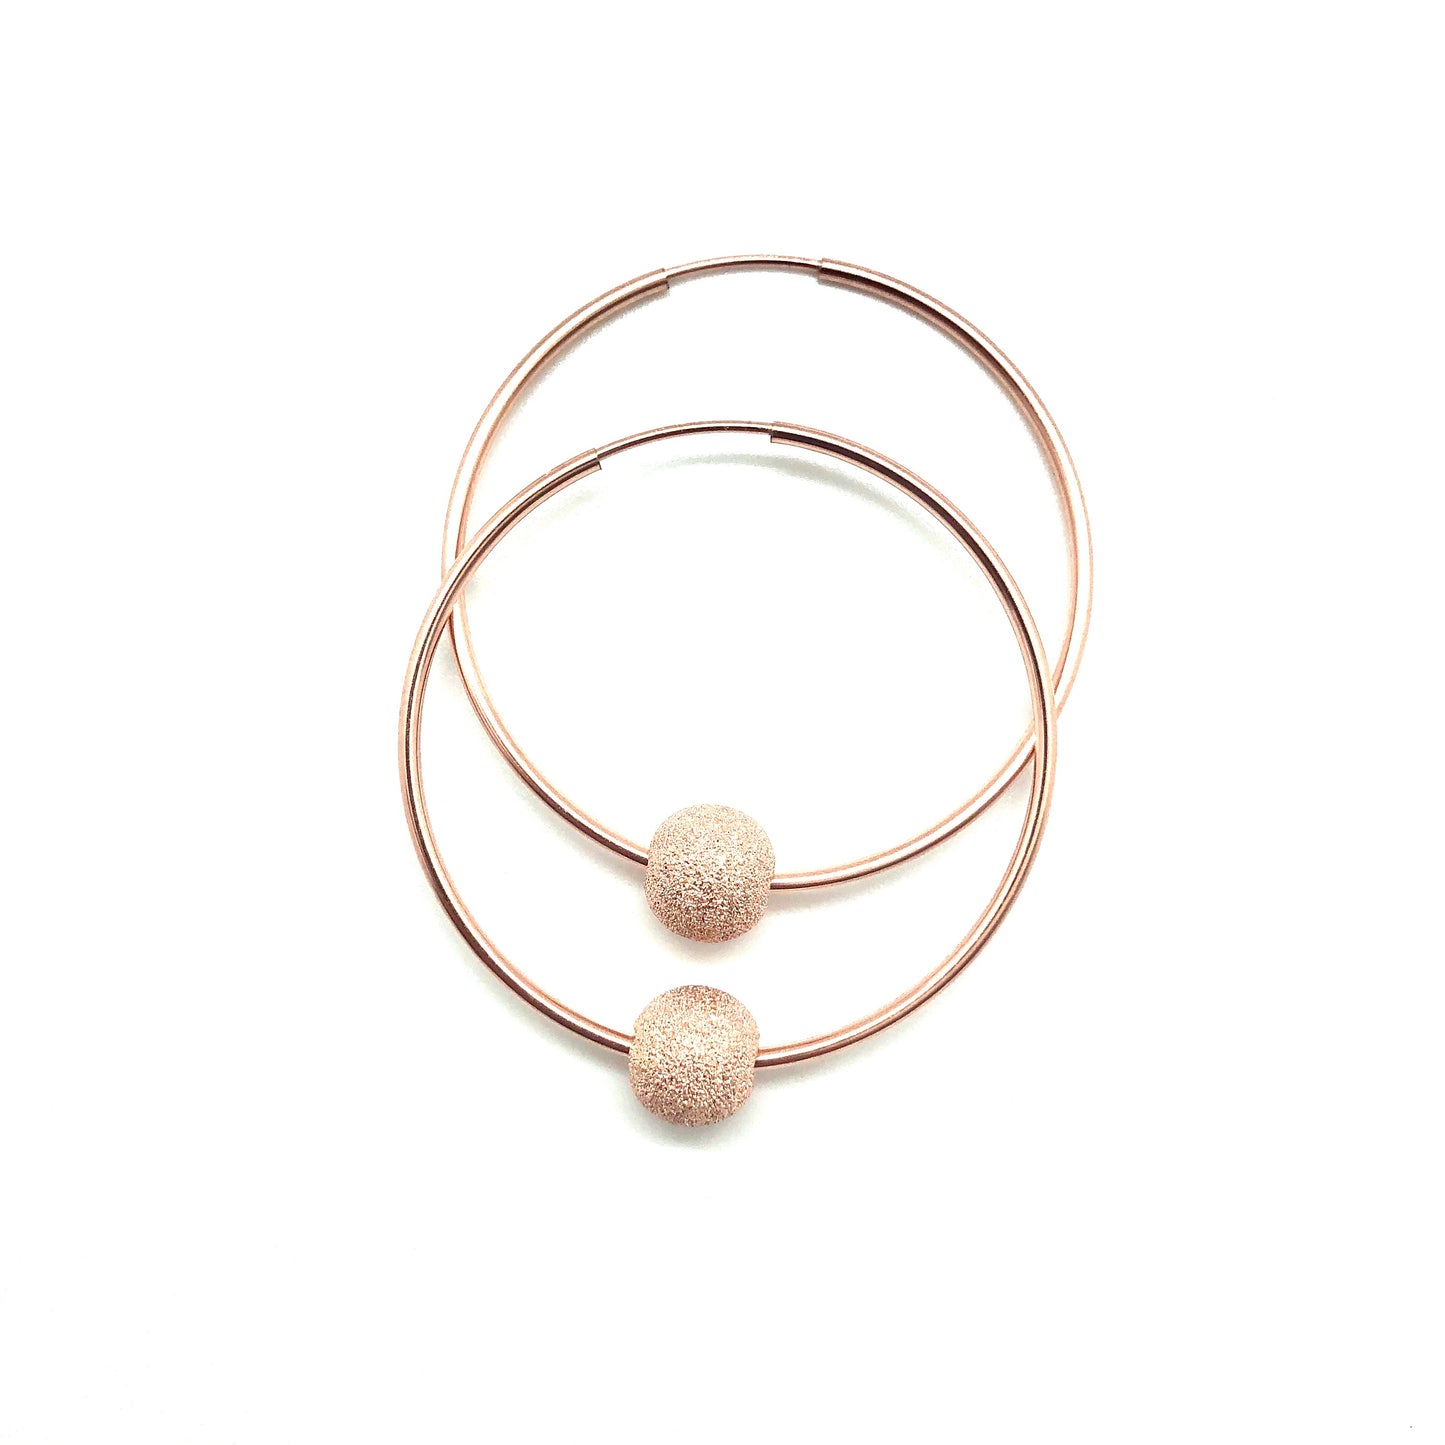 38mm Rose Gold Hoop Earrings with 8mm stardust RG charm at RM KANDY